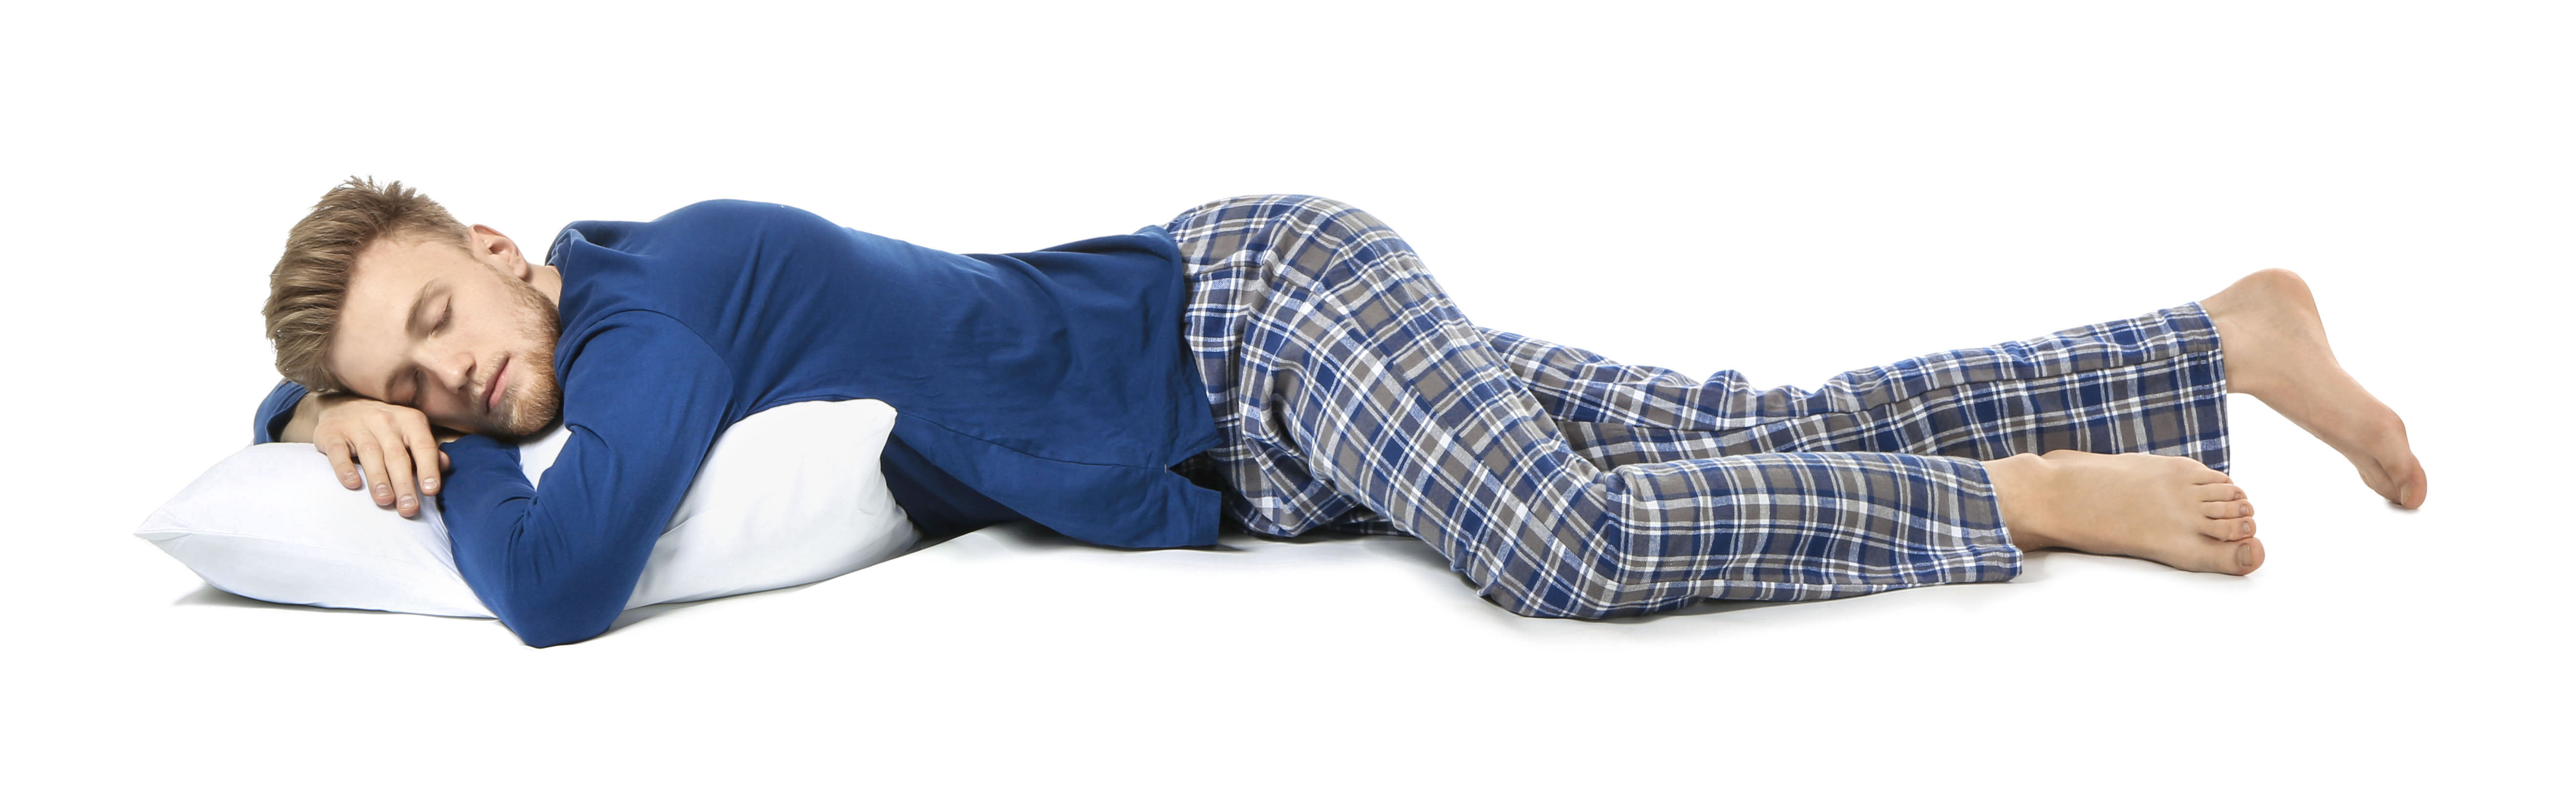 Image of a young man in a blut t-shirt and blue/gray plaid pajama pants lying asleep on a white pillow. Background of image is white.